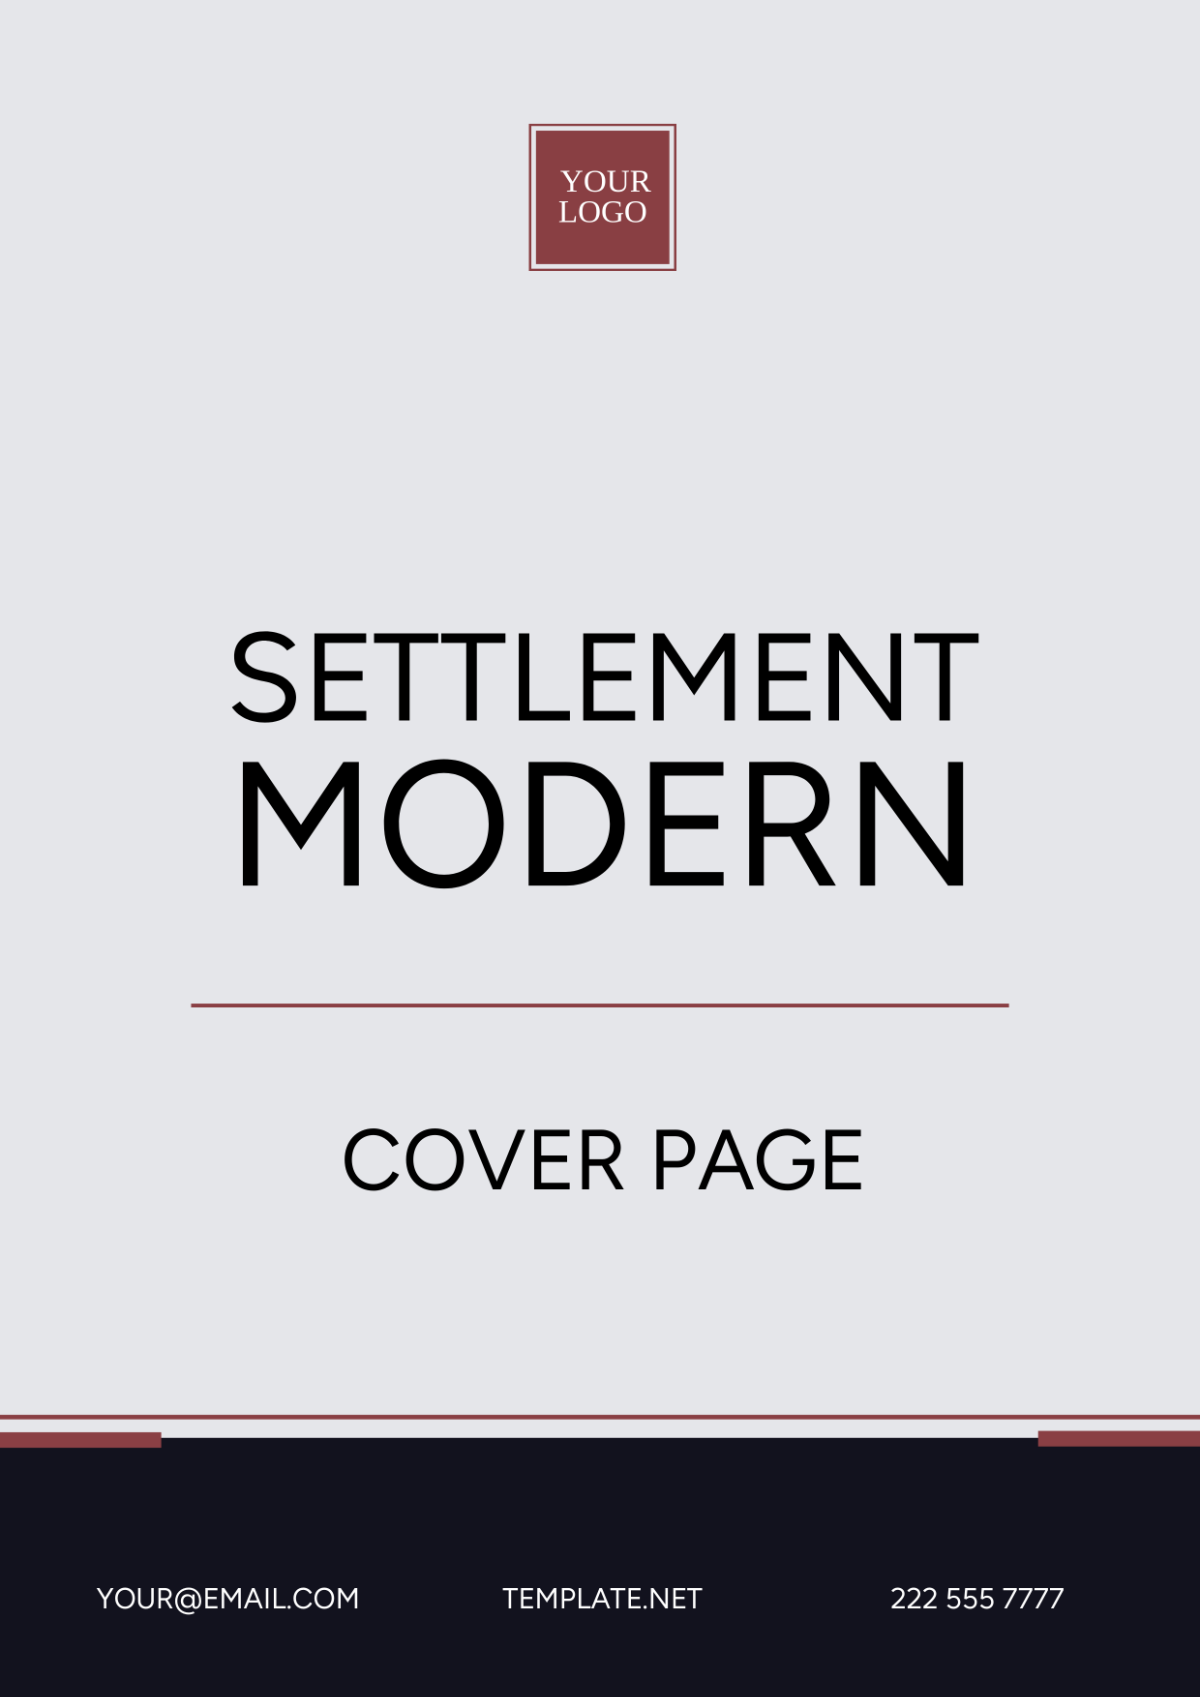 Settlement Modern Cover Page Template